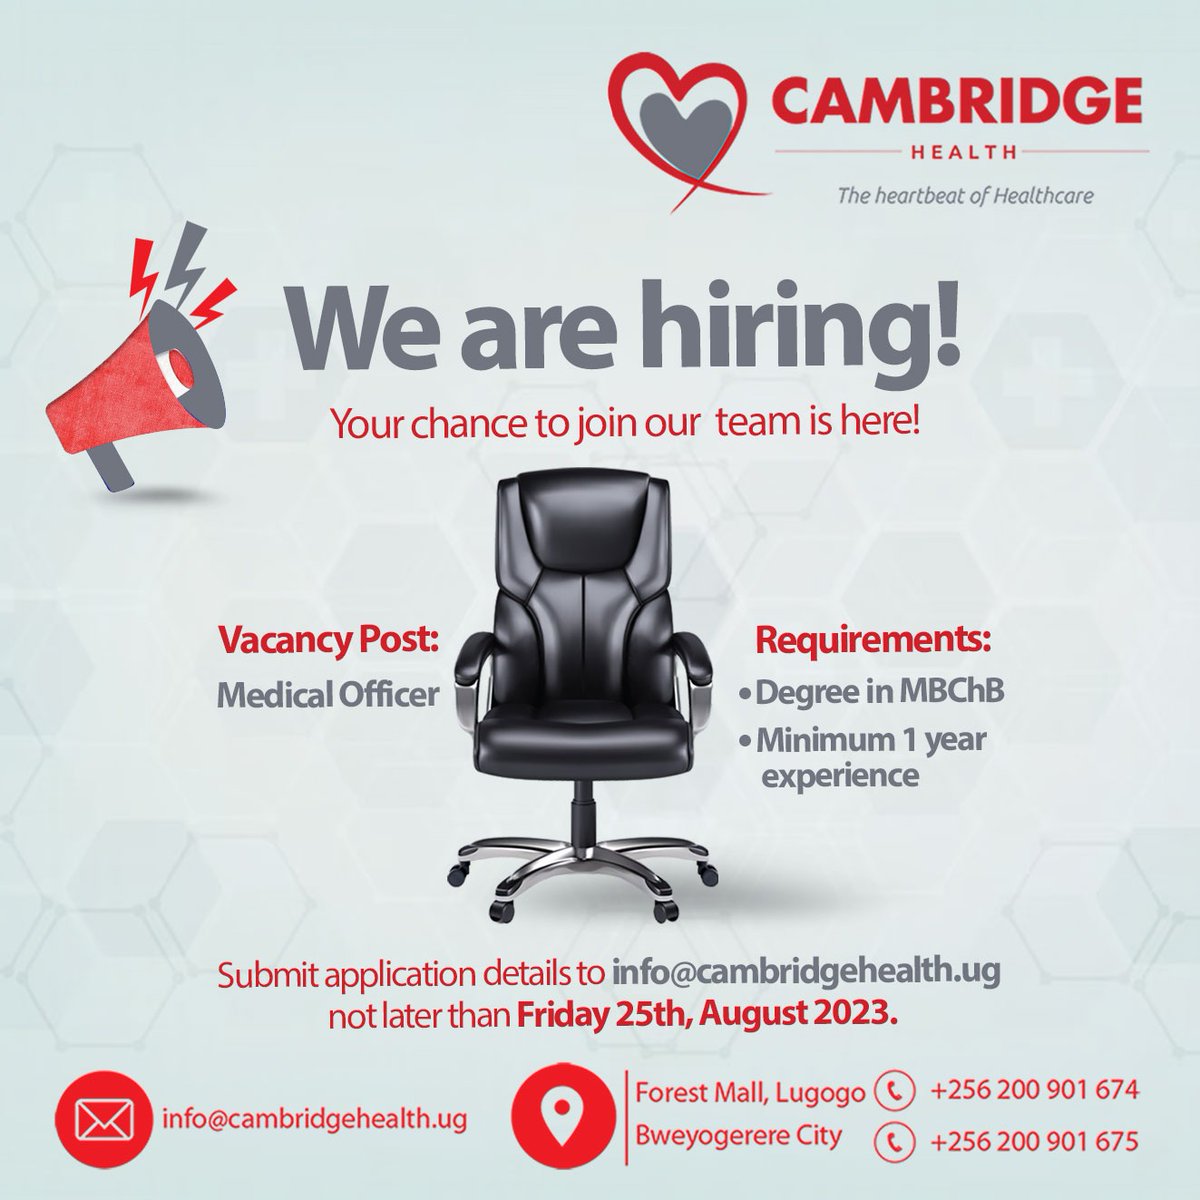 #JobAlert

Do you have what it takes to join our team as a Medical Officer?

Submit your application details to info@cambridgehealth.ug not later than Friday 25th, August 2023.

Good luck.

#CambridgeHealth #MedicalOfficer #vacancyalert